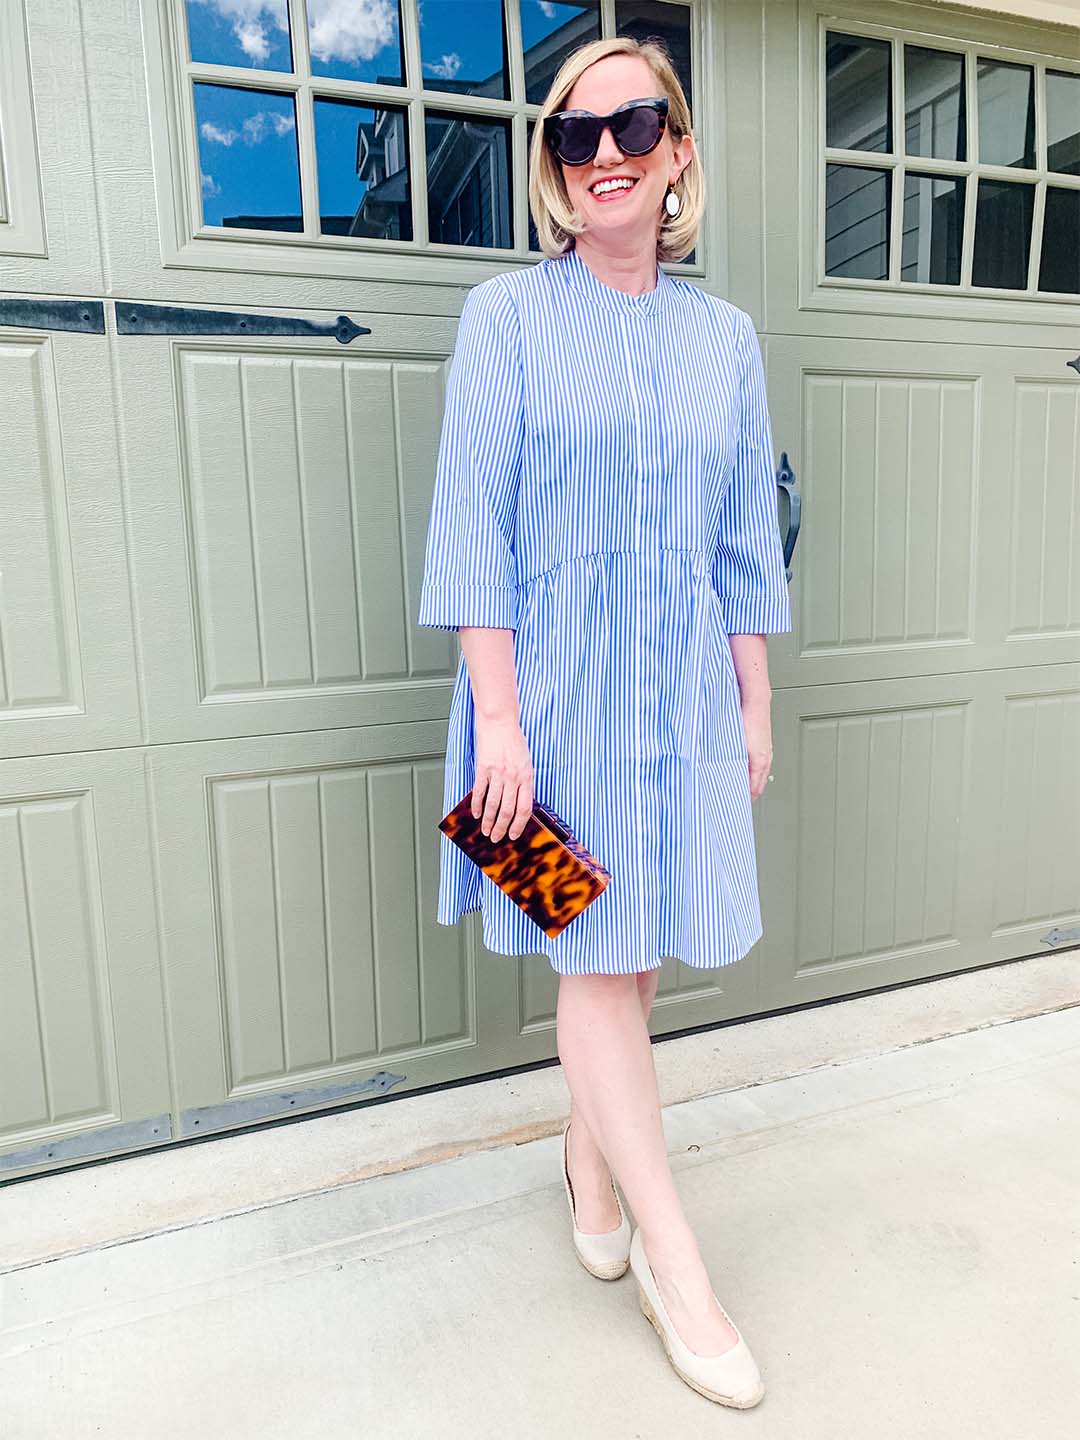 Tuckernuck blue and white striped royal shirt dress with espadrille wedges and tortoise clutch